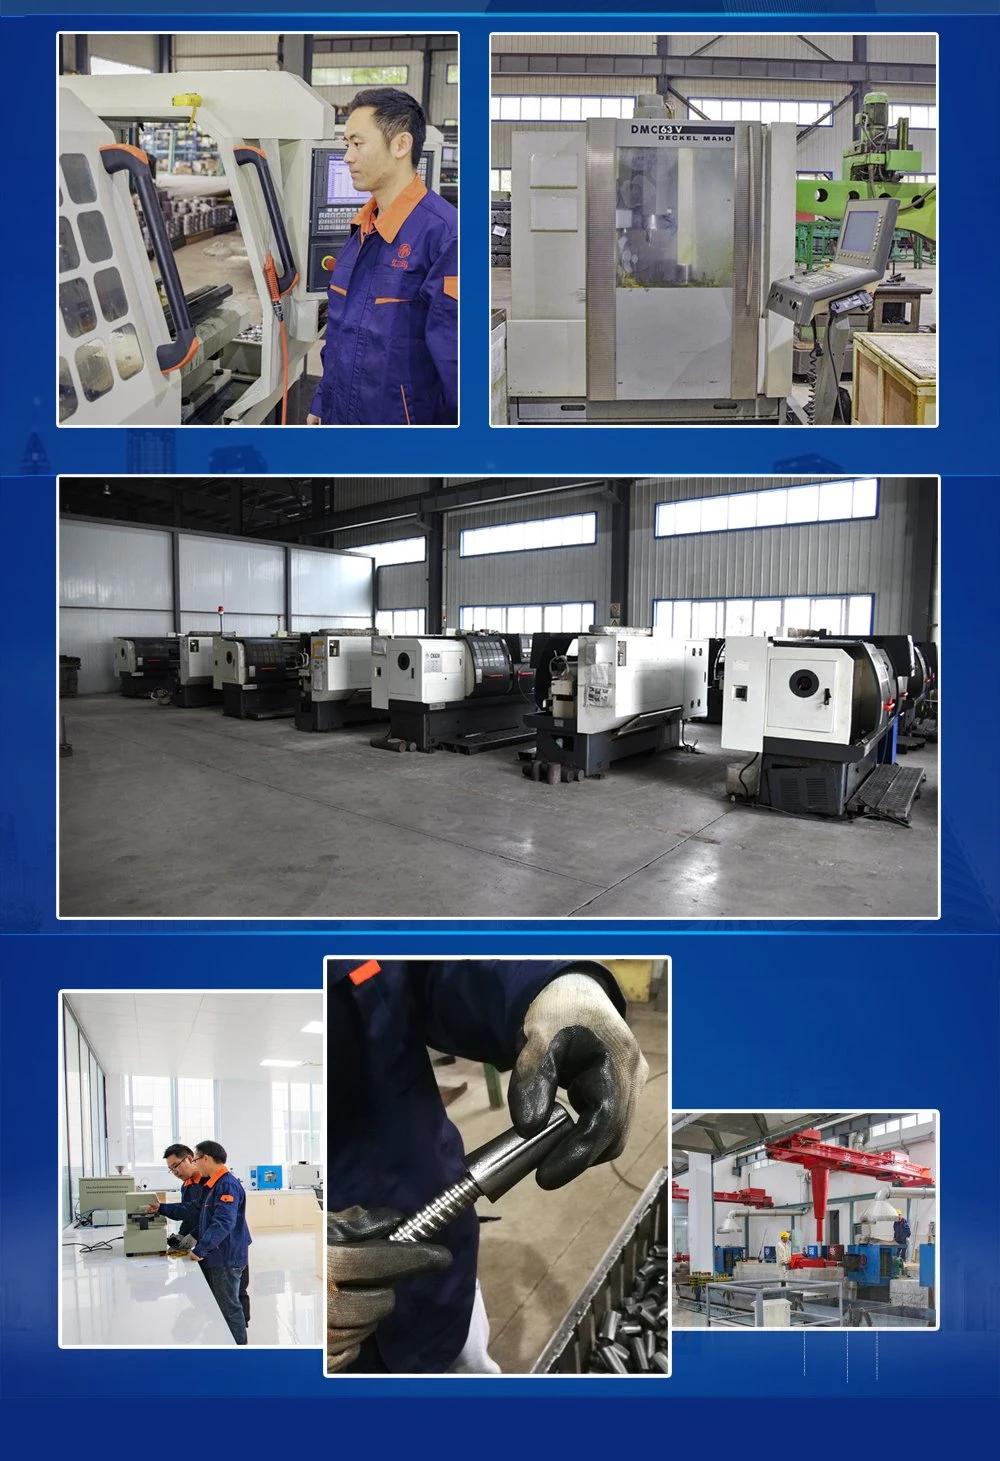 Investment Casting, Machining, Equipment, Construction, Mining, Lost Wax, Assembling Set, Power Fitting, OEM, Steel, Auto Part